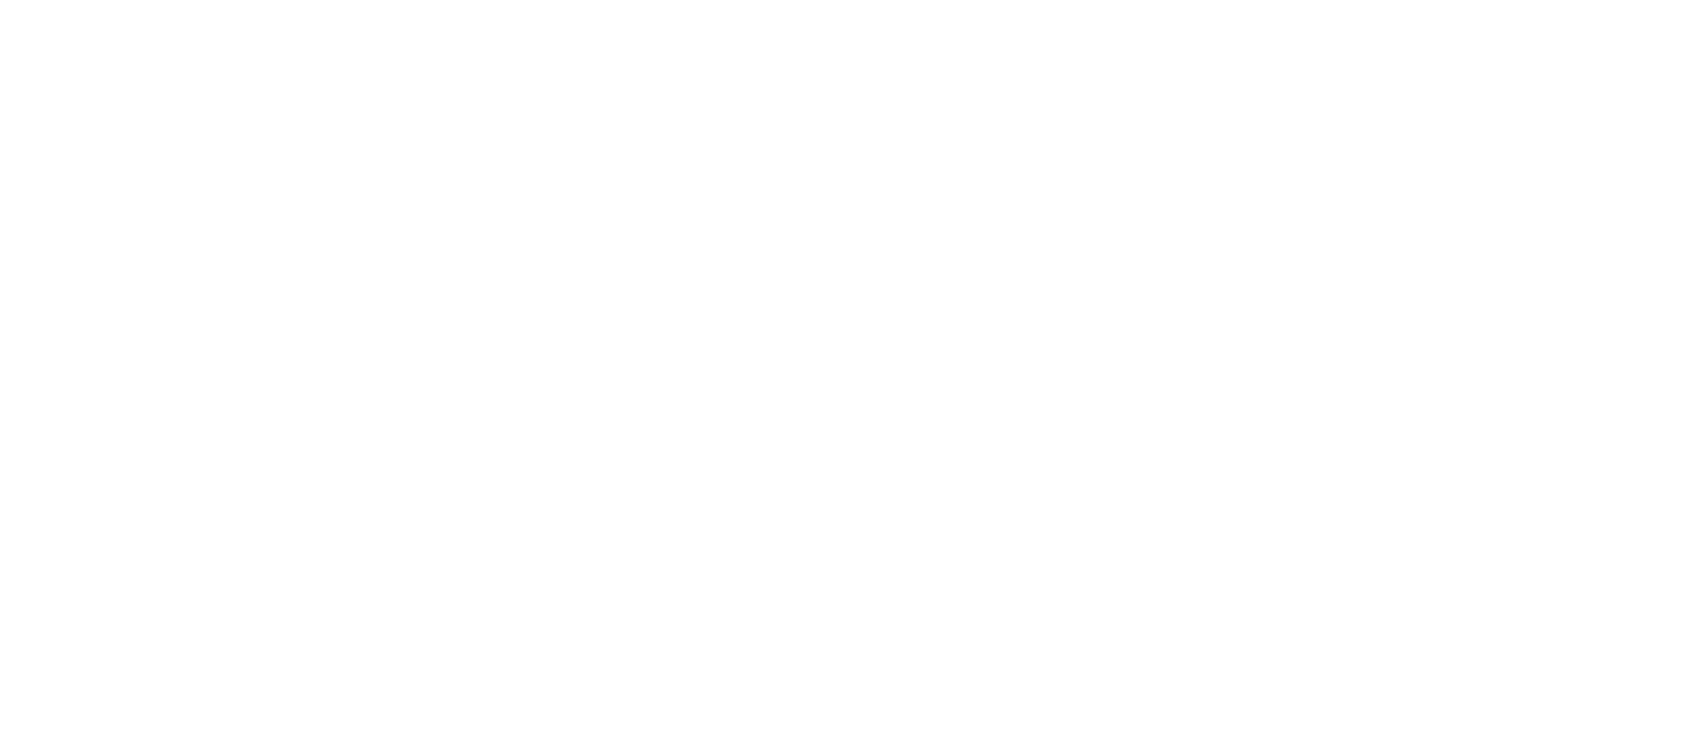 ATSG logo in white with transparent background